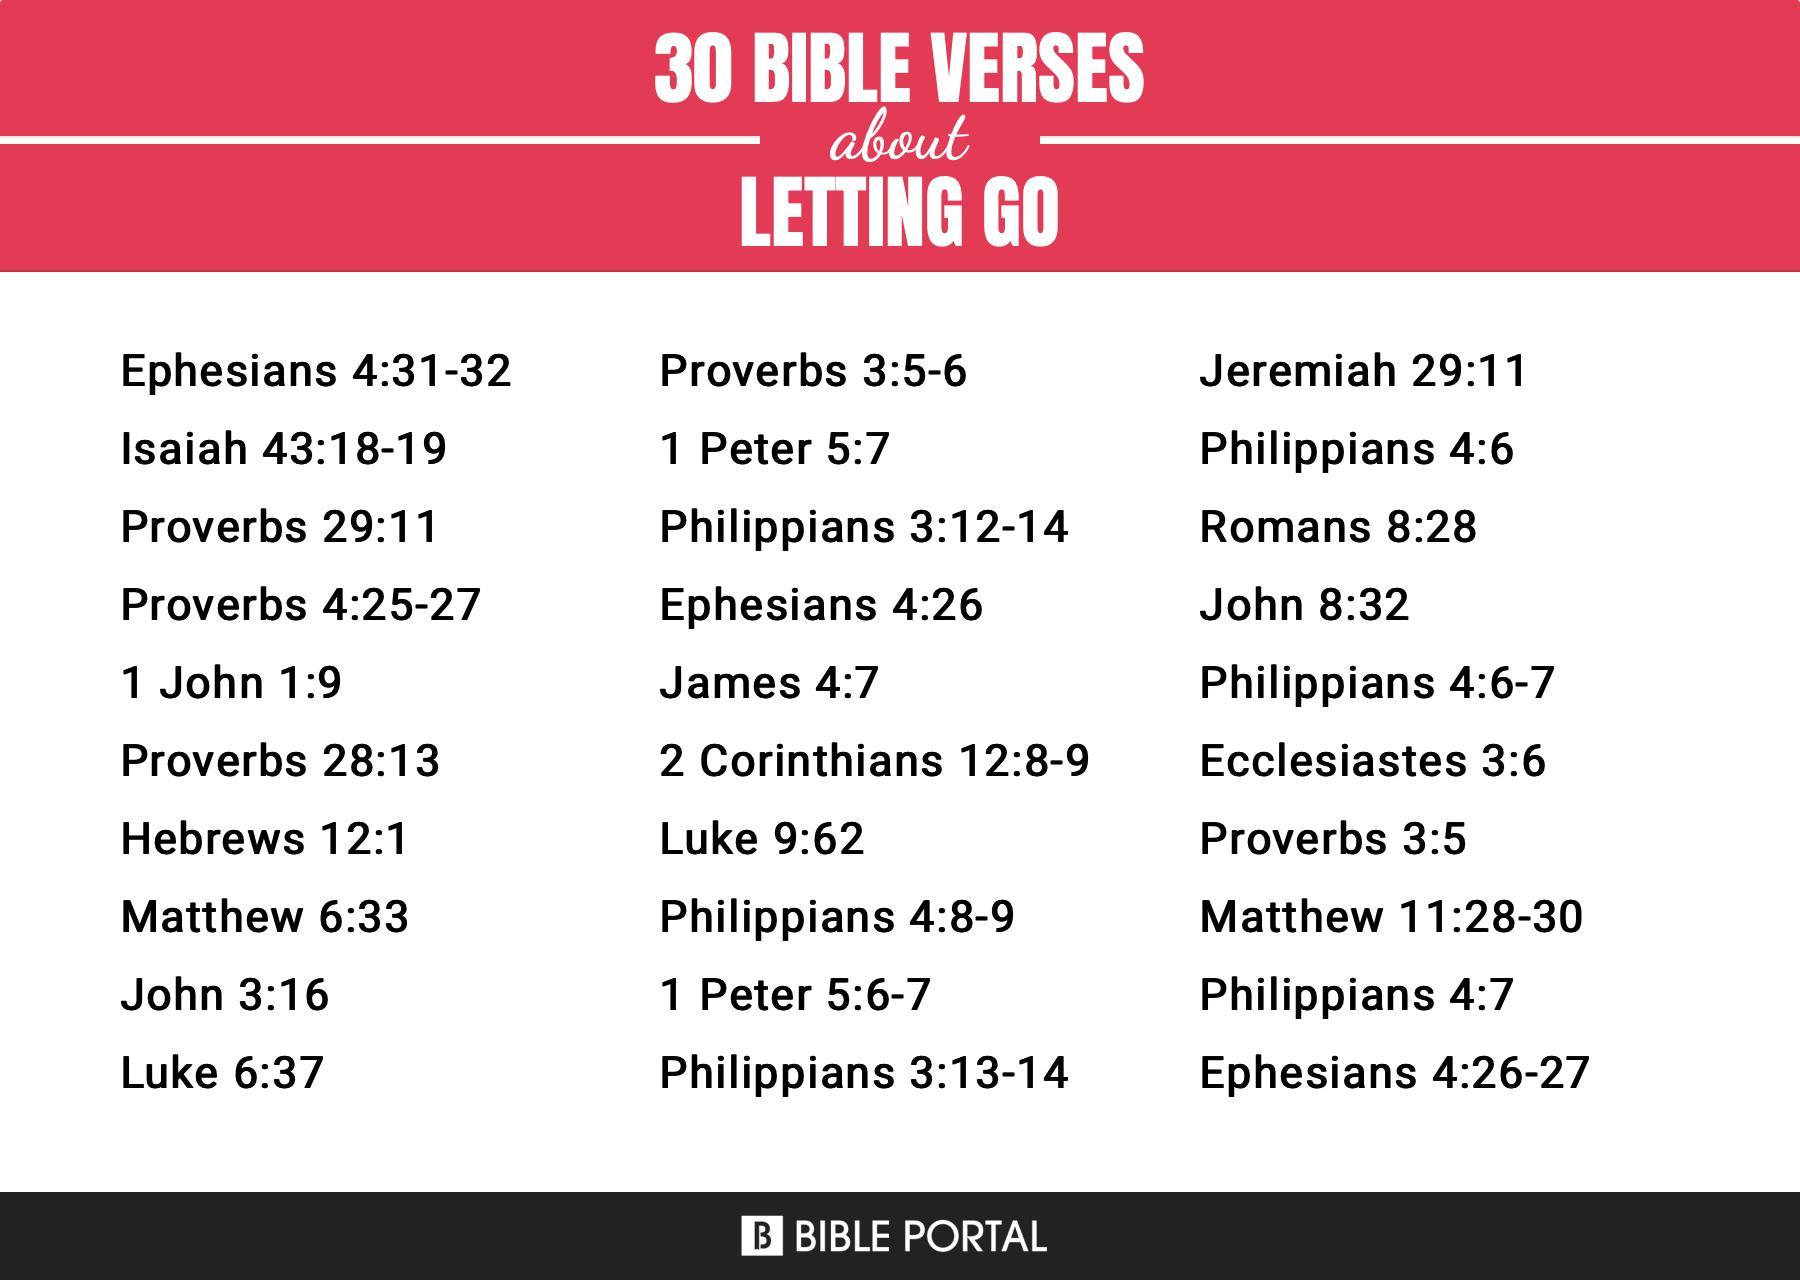 What Does the Bible Say about Letting Go?